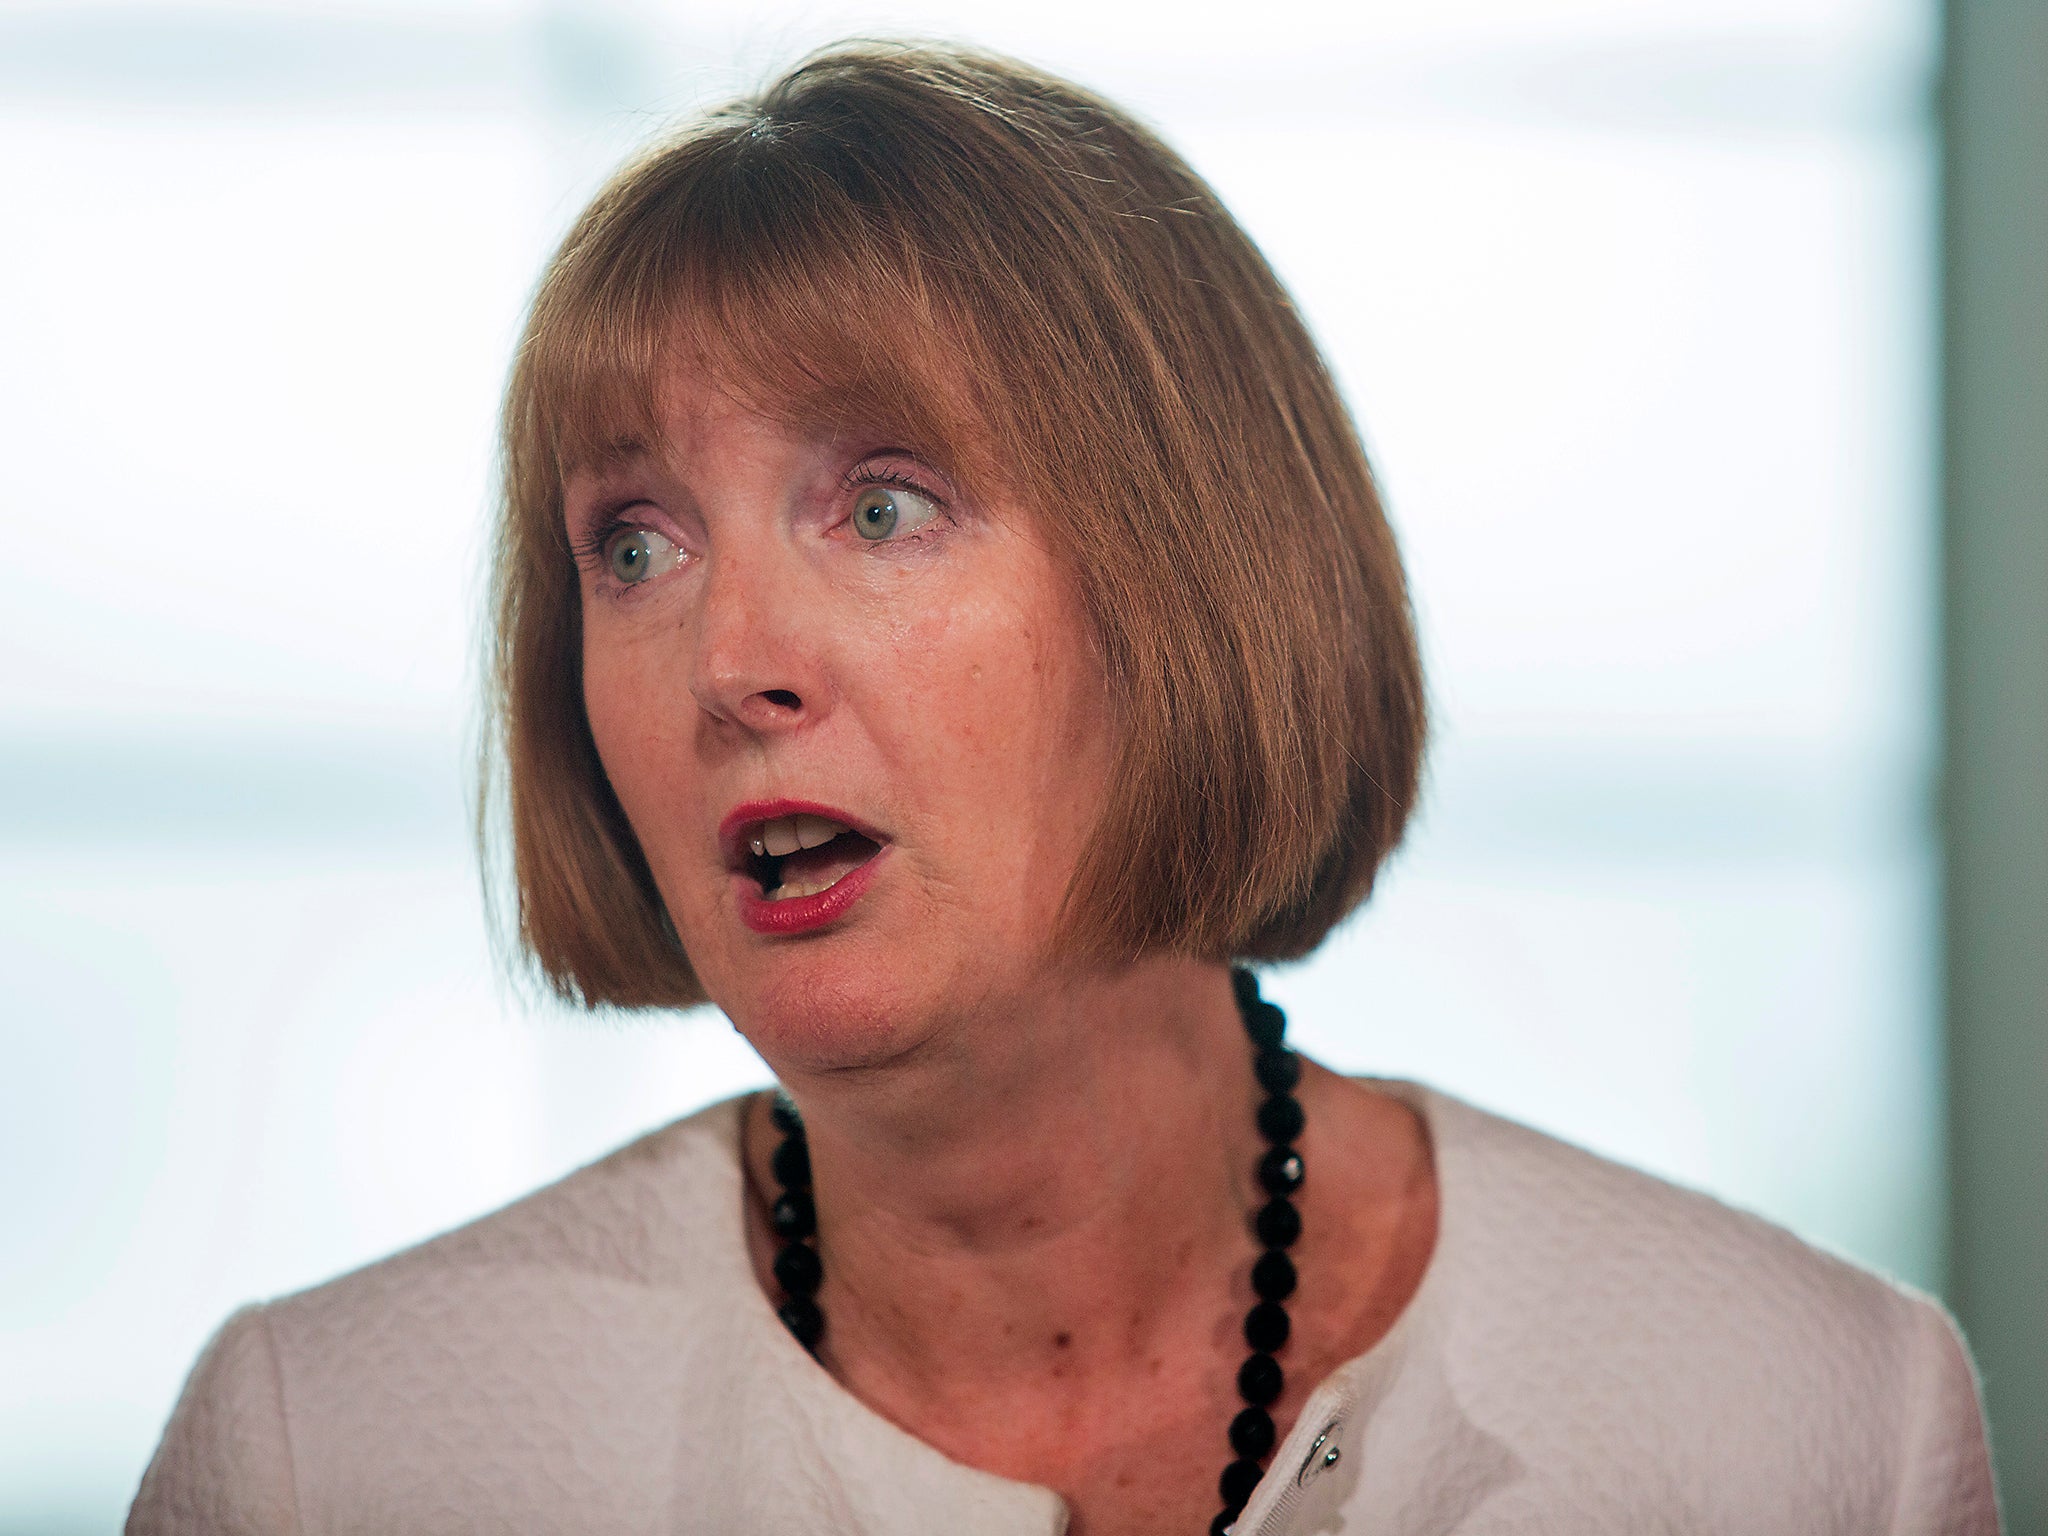 ‘I could not be there clapping a man who is a self-confessed groper’, Harriet Harman said